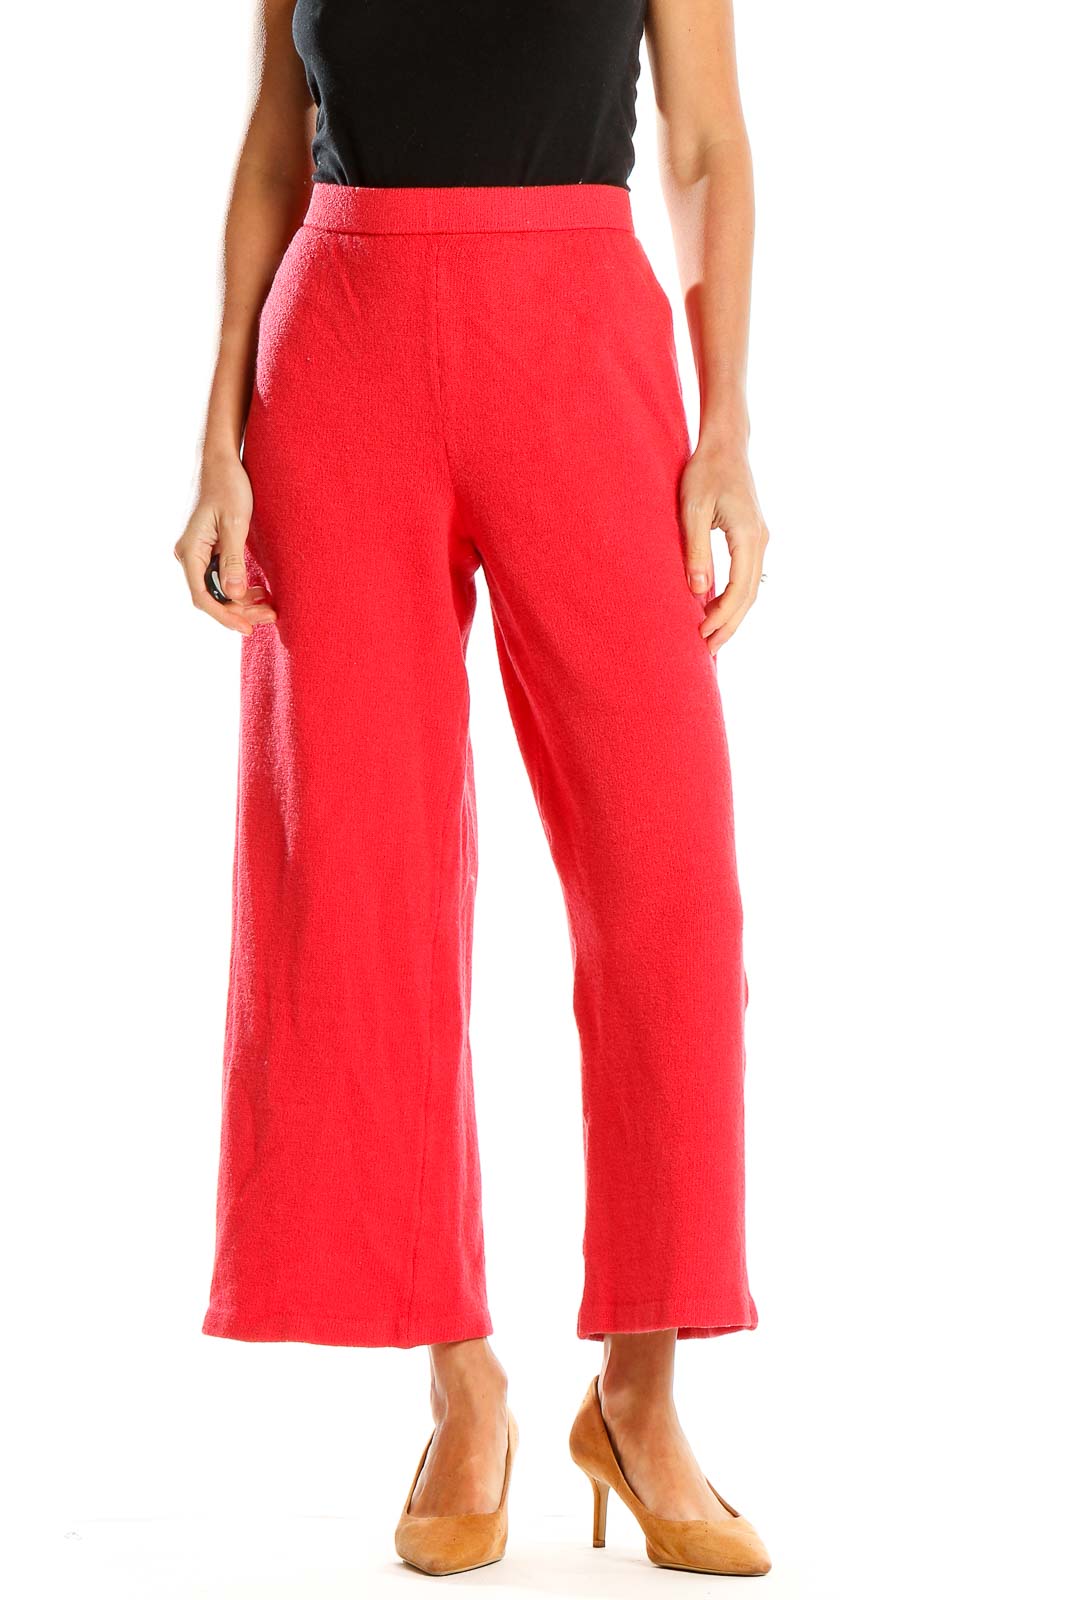 Red Culottes Pants Front